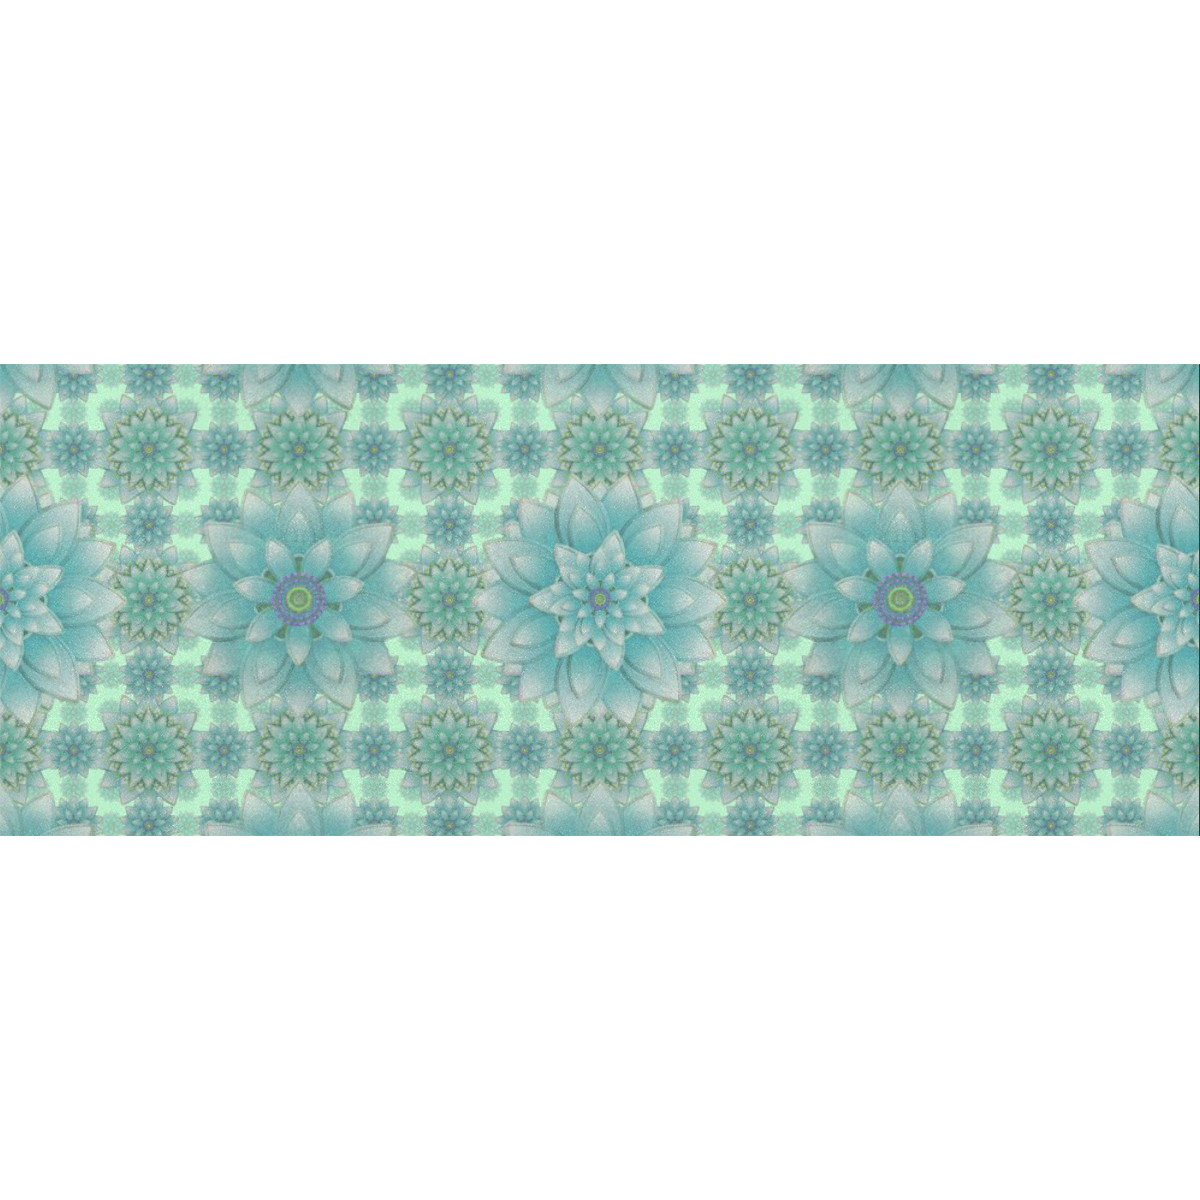 Turquoise Happiness, Lotus pattern Gift Wrapping Paper 58"x 23" (5 Rolls)